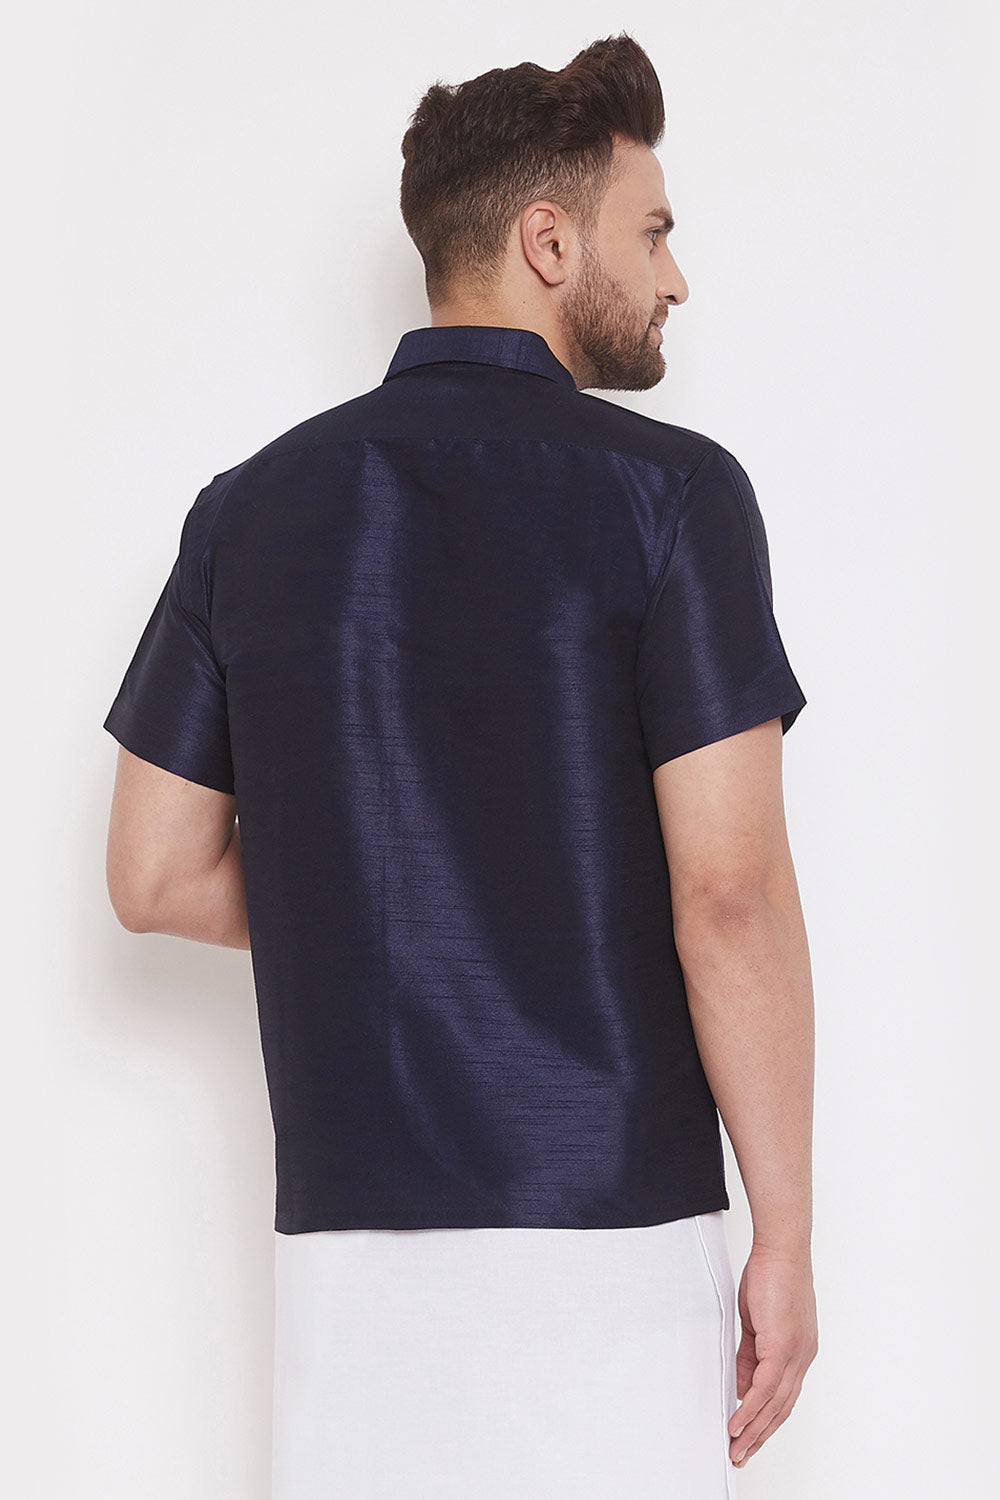 Solid Navy Blue Shirt for Casual Wear